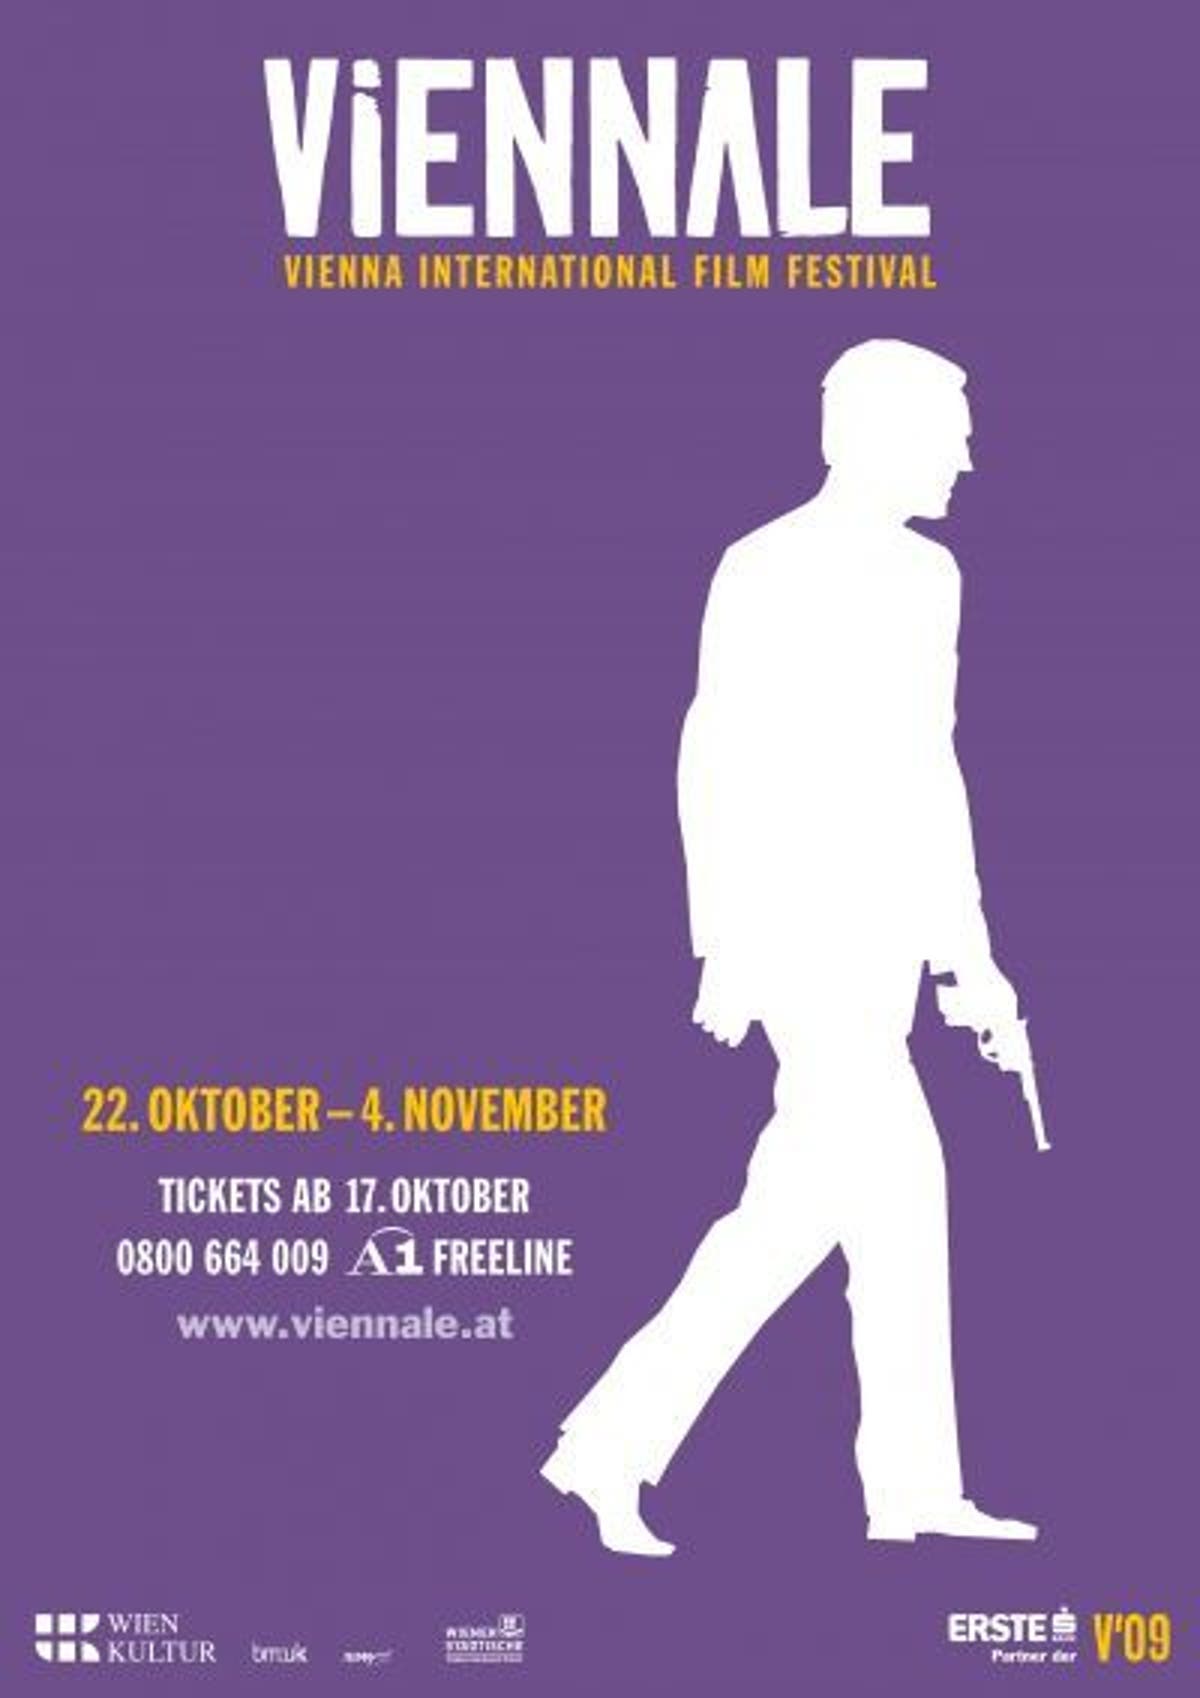 The Vienna Film Festival focuses on independent films The Independent